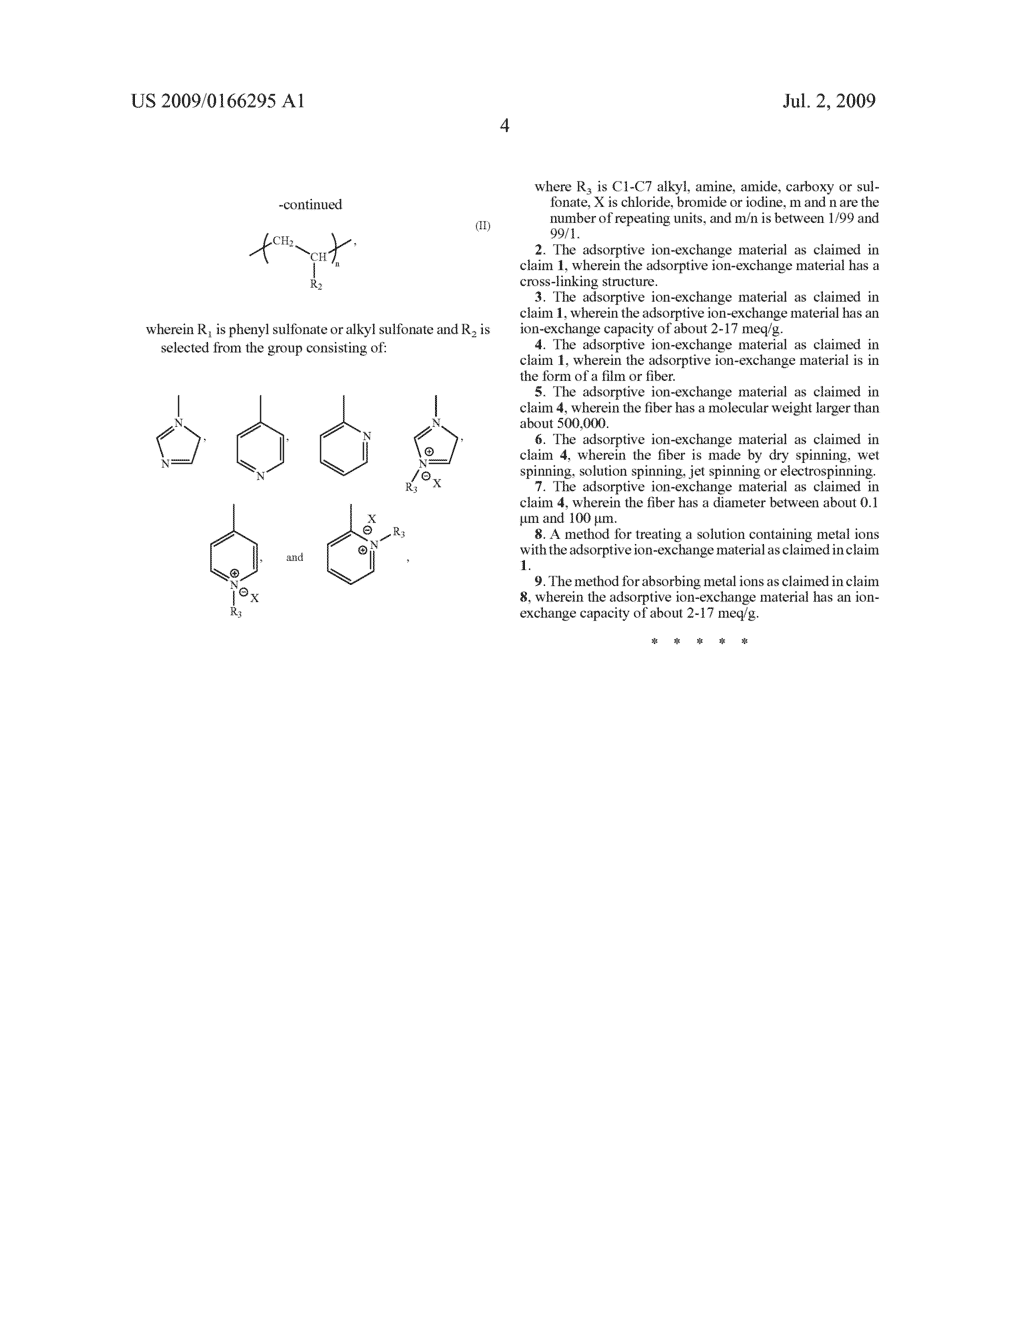 ADSORPTIVE ION-EXCHANGE MATERIAL AND METHOD FOR FILTERING METAL IONS USING THE MATERIAL - diagram, schematic, and image 06